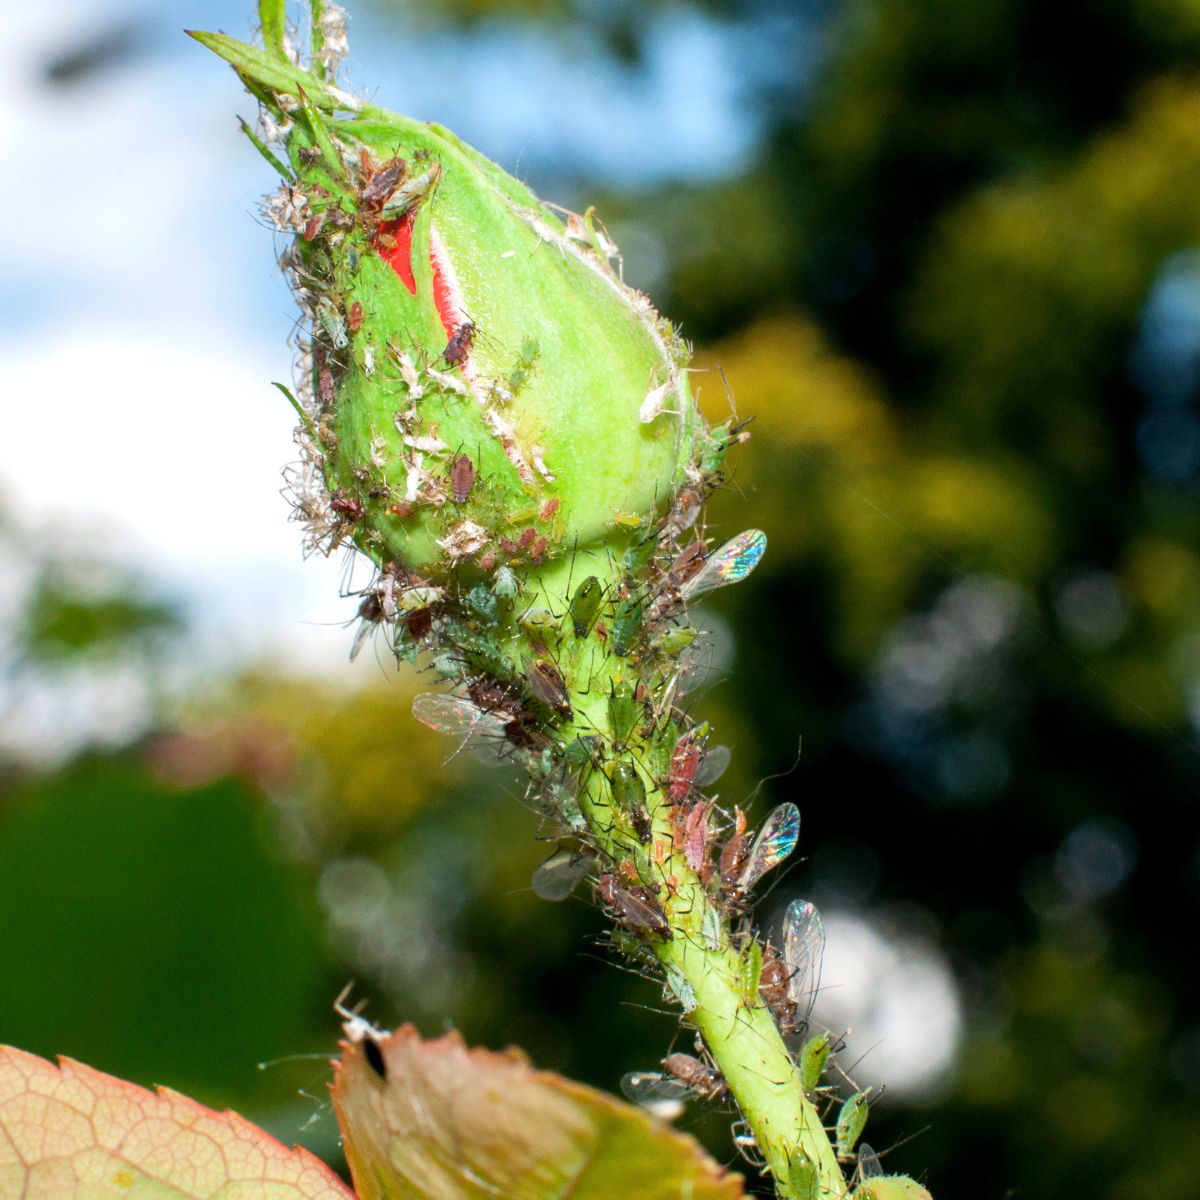 Aphids feeding on a rose bud. 